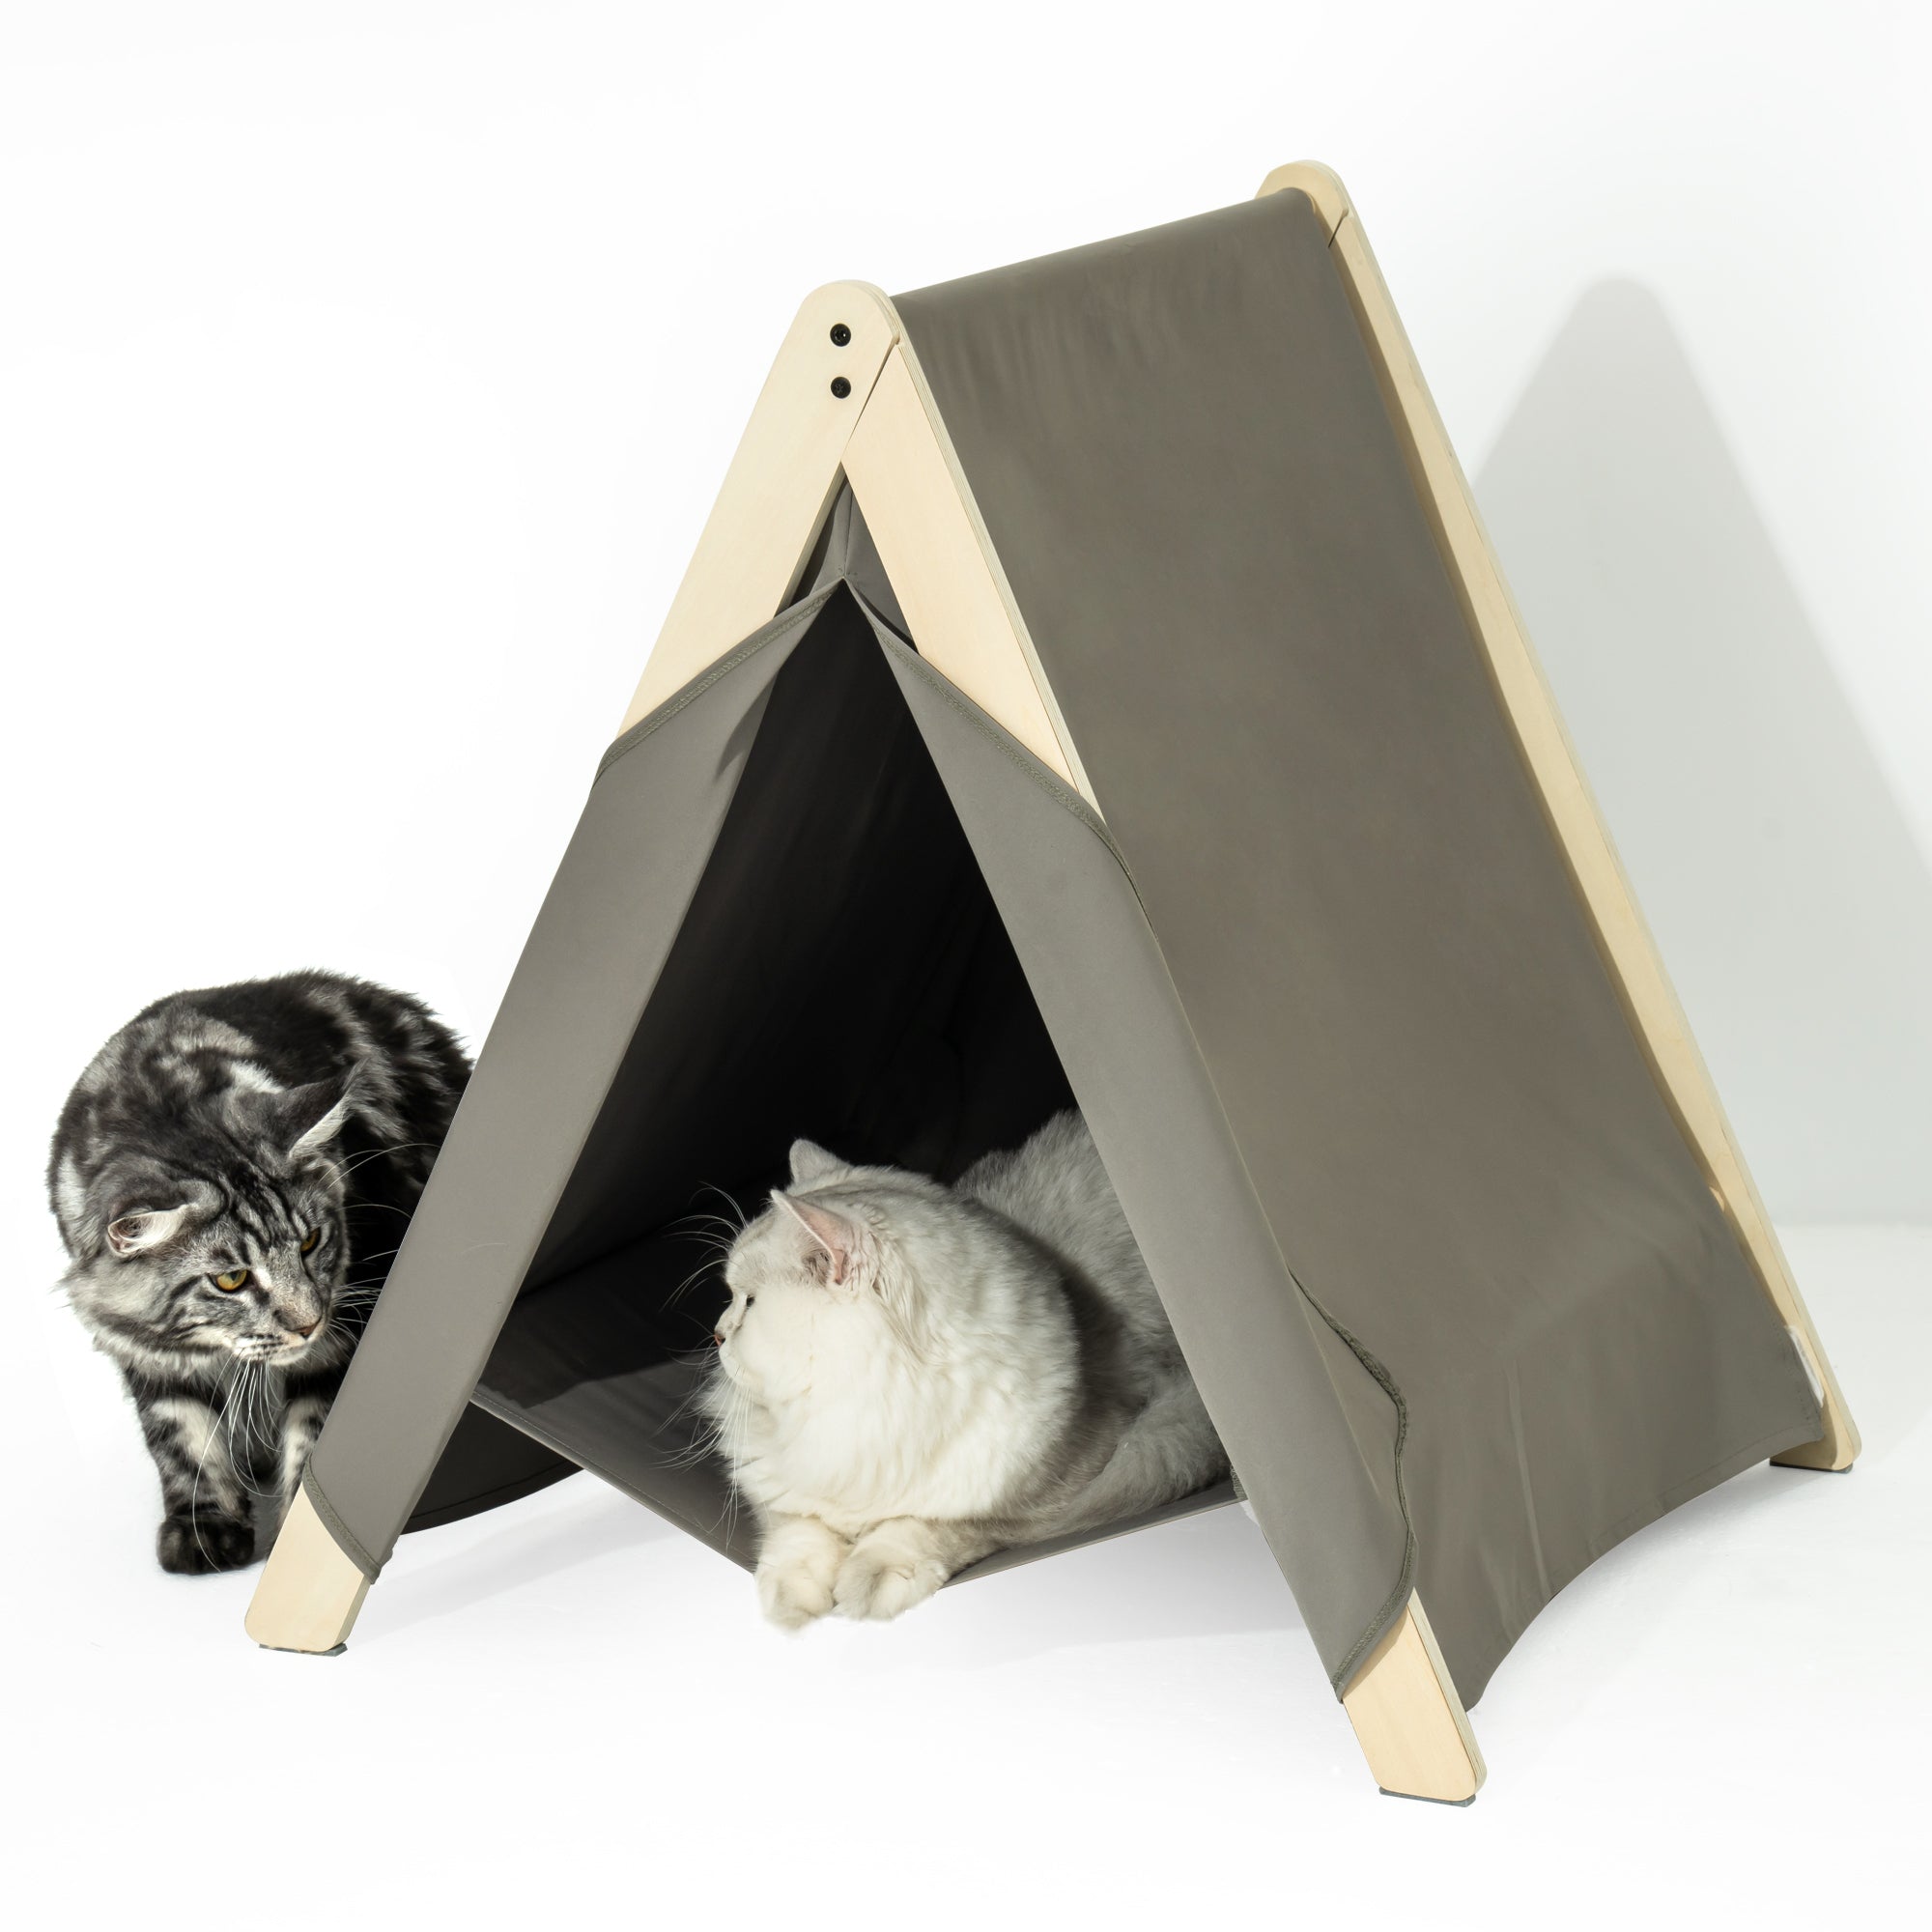 Pet Tent, Cat Tent for Indoor Cats, Wooden Cat House for small Pets - Gray green